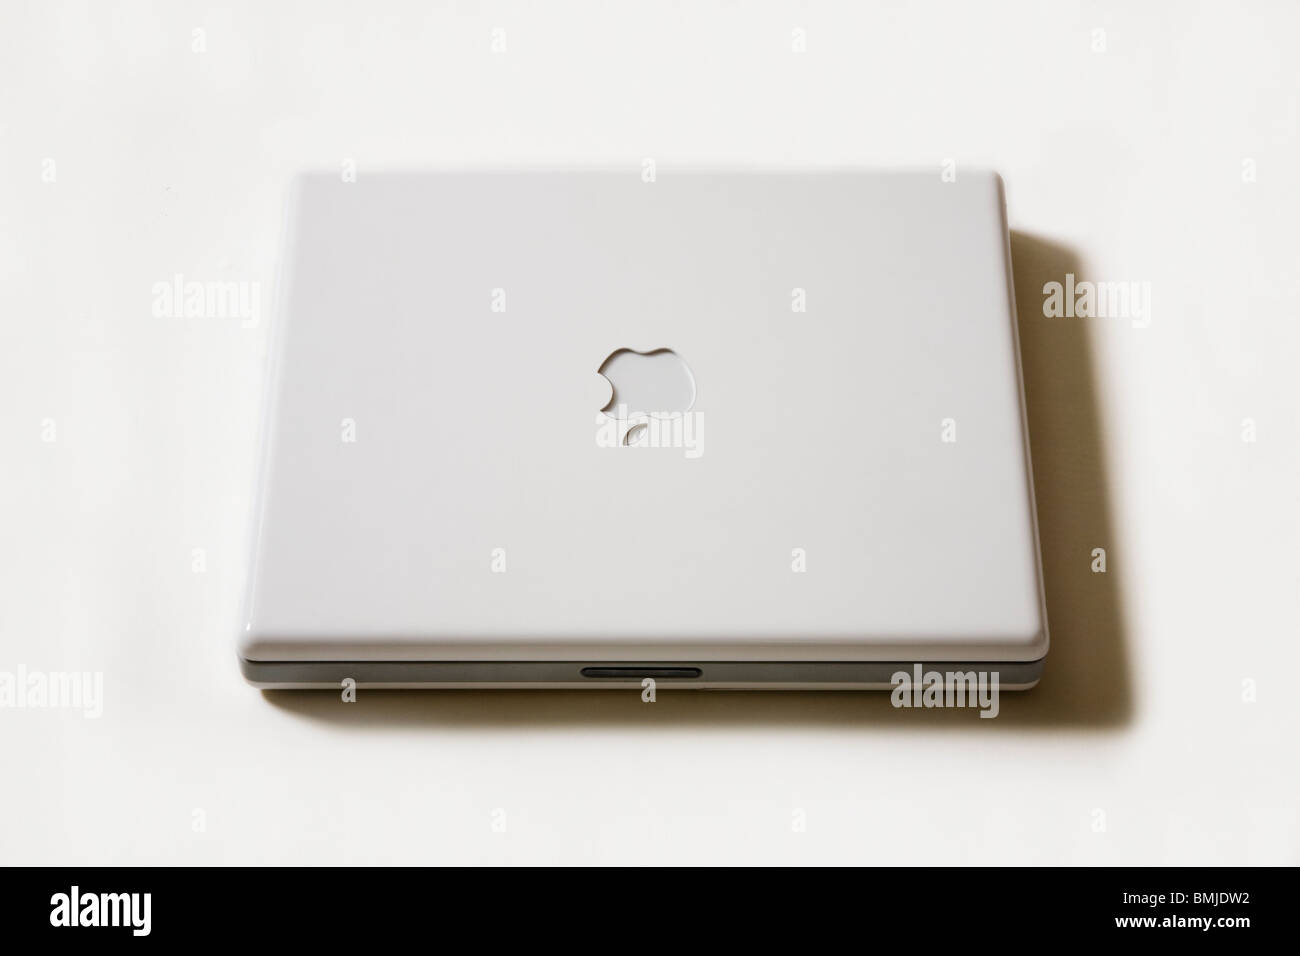 A closed Apple iBook G4 laptop / lap top computer showing the Apple logo. Stock Photo